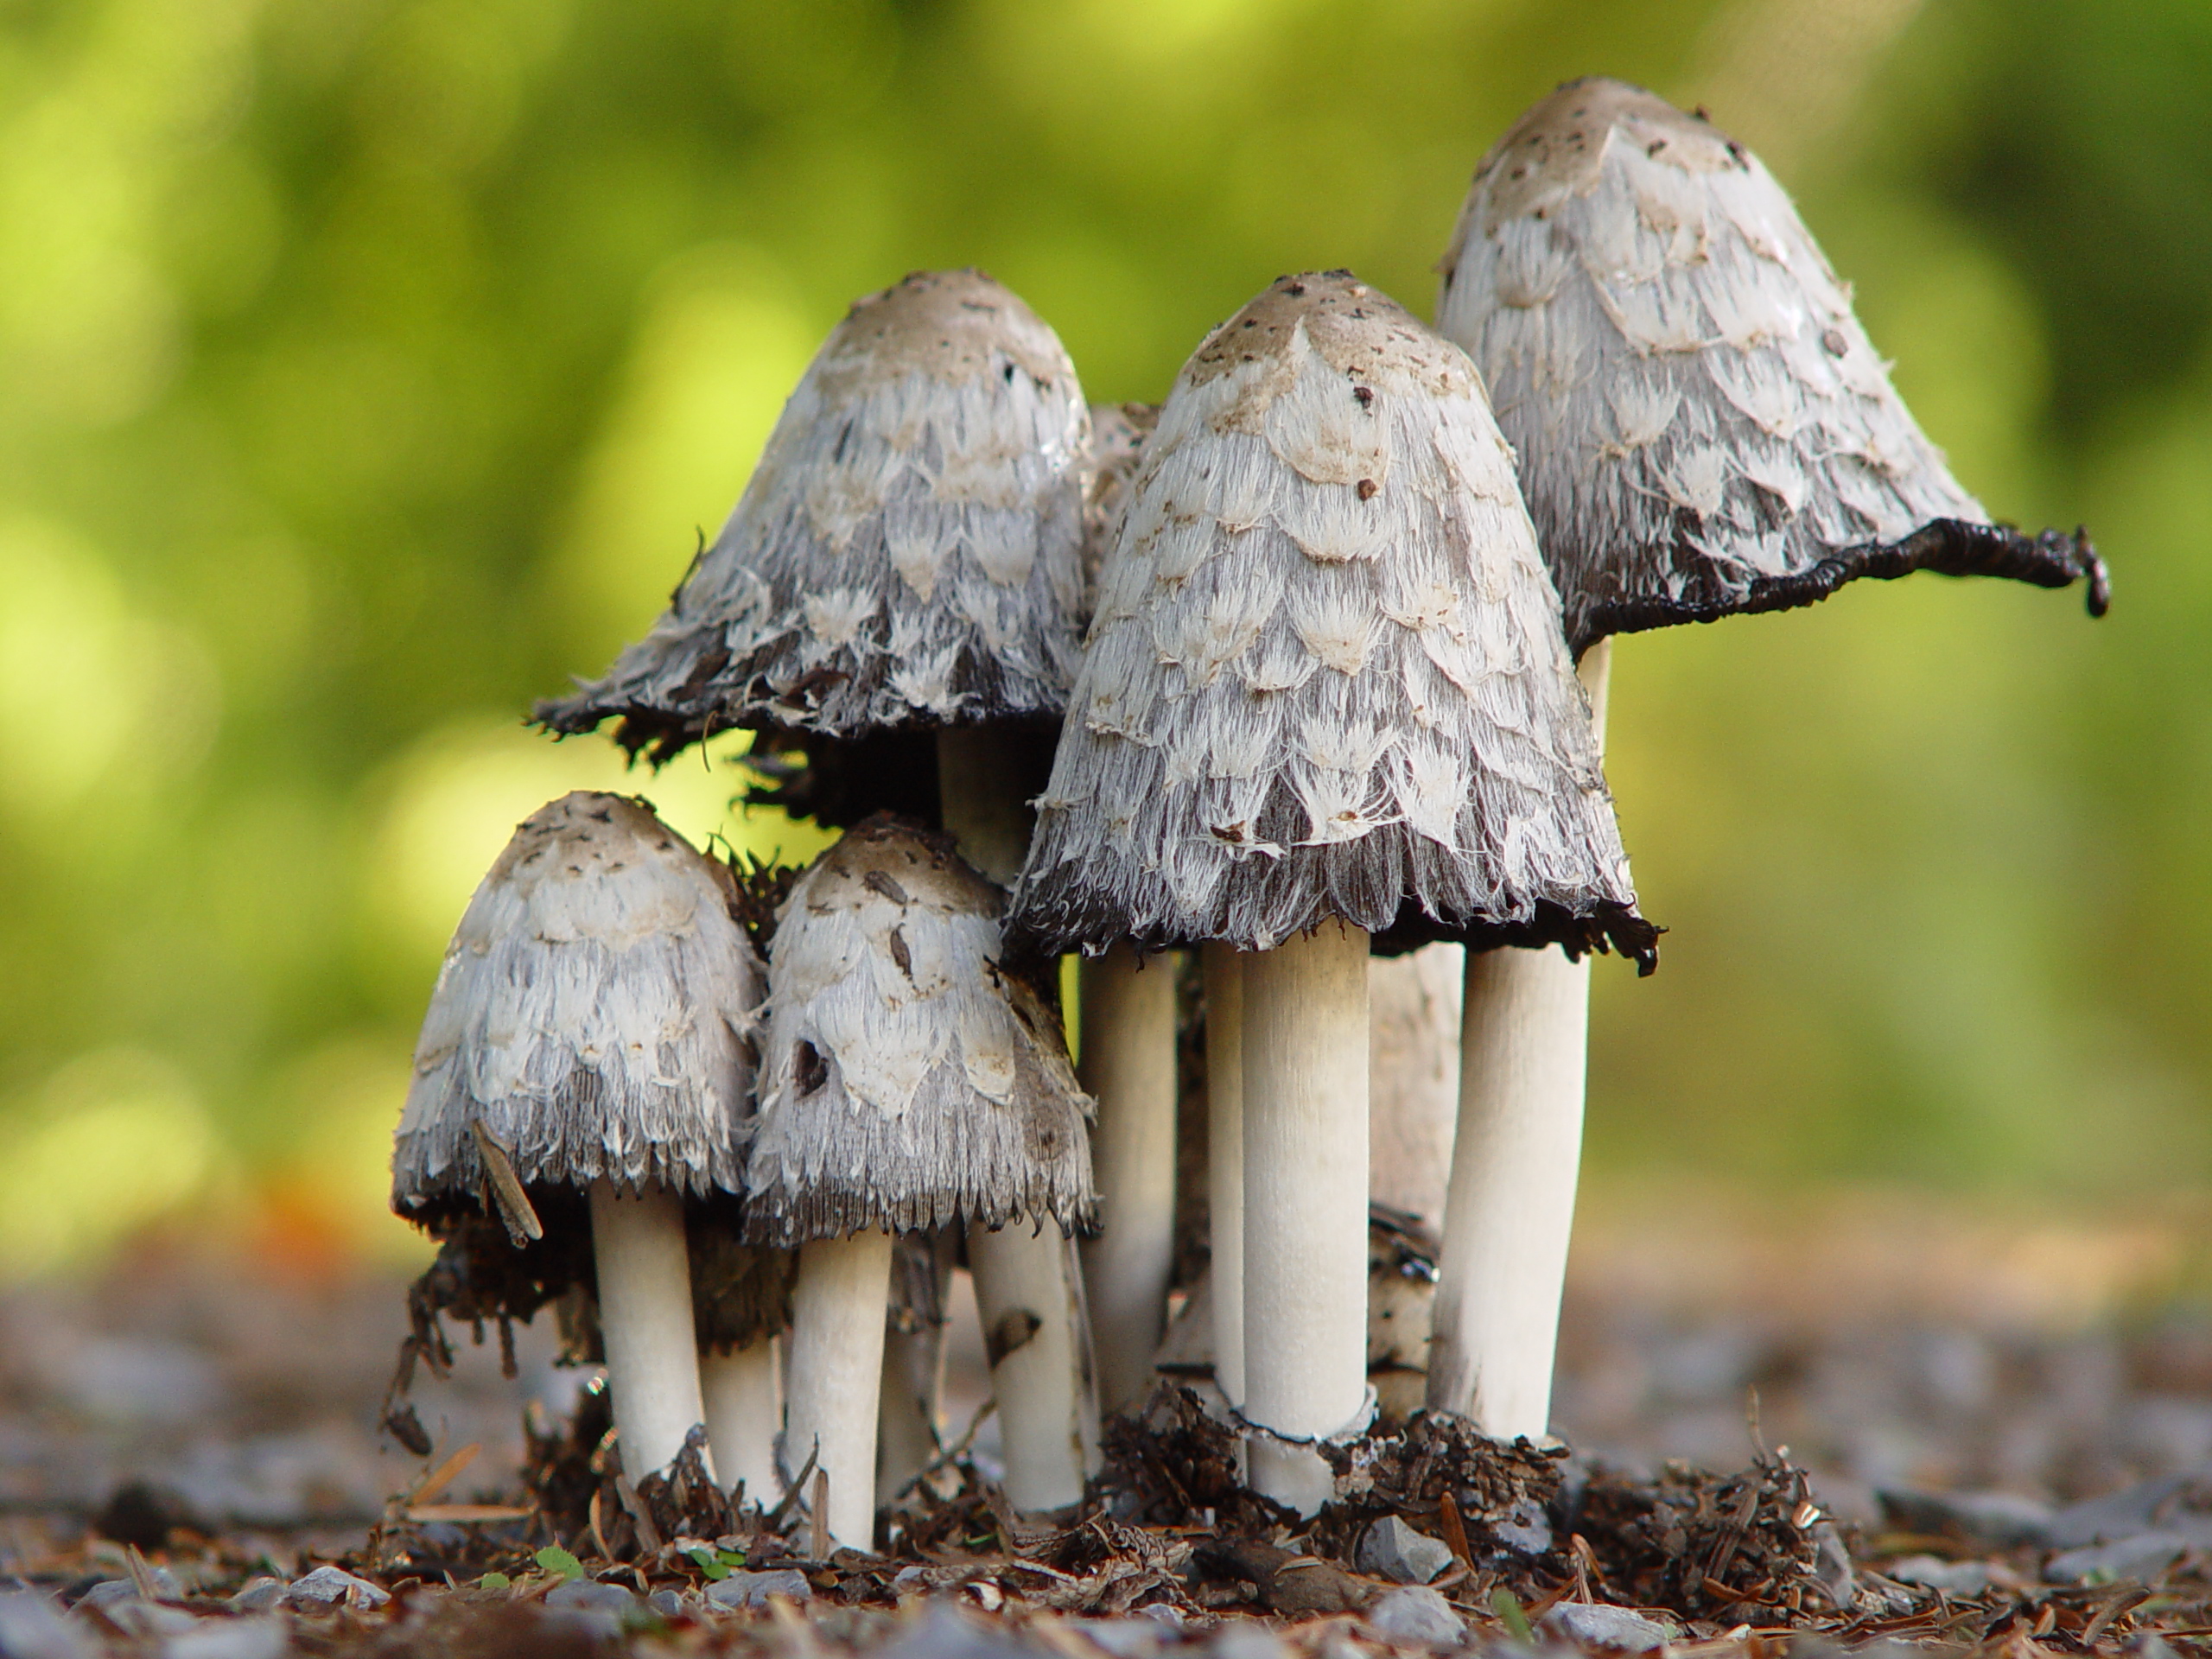 A photo of natural Magic Mushrooms, showcasing their unique appearance in a forest setting.